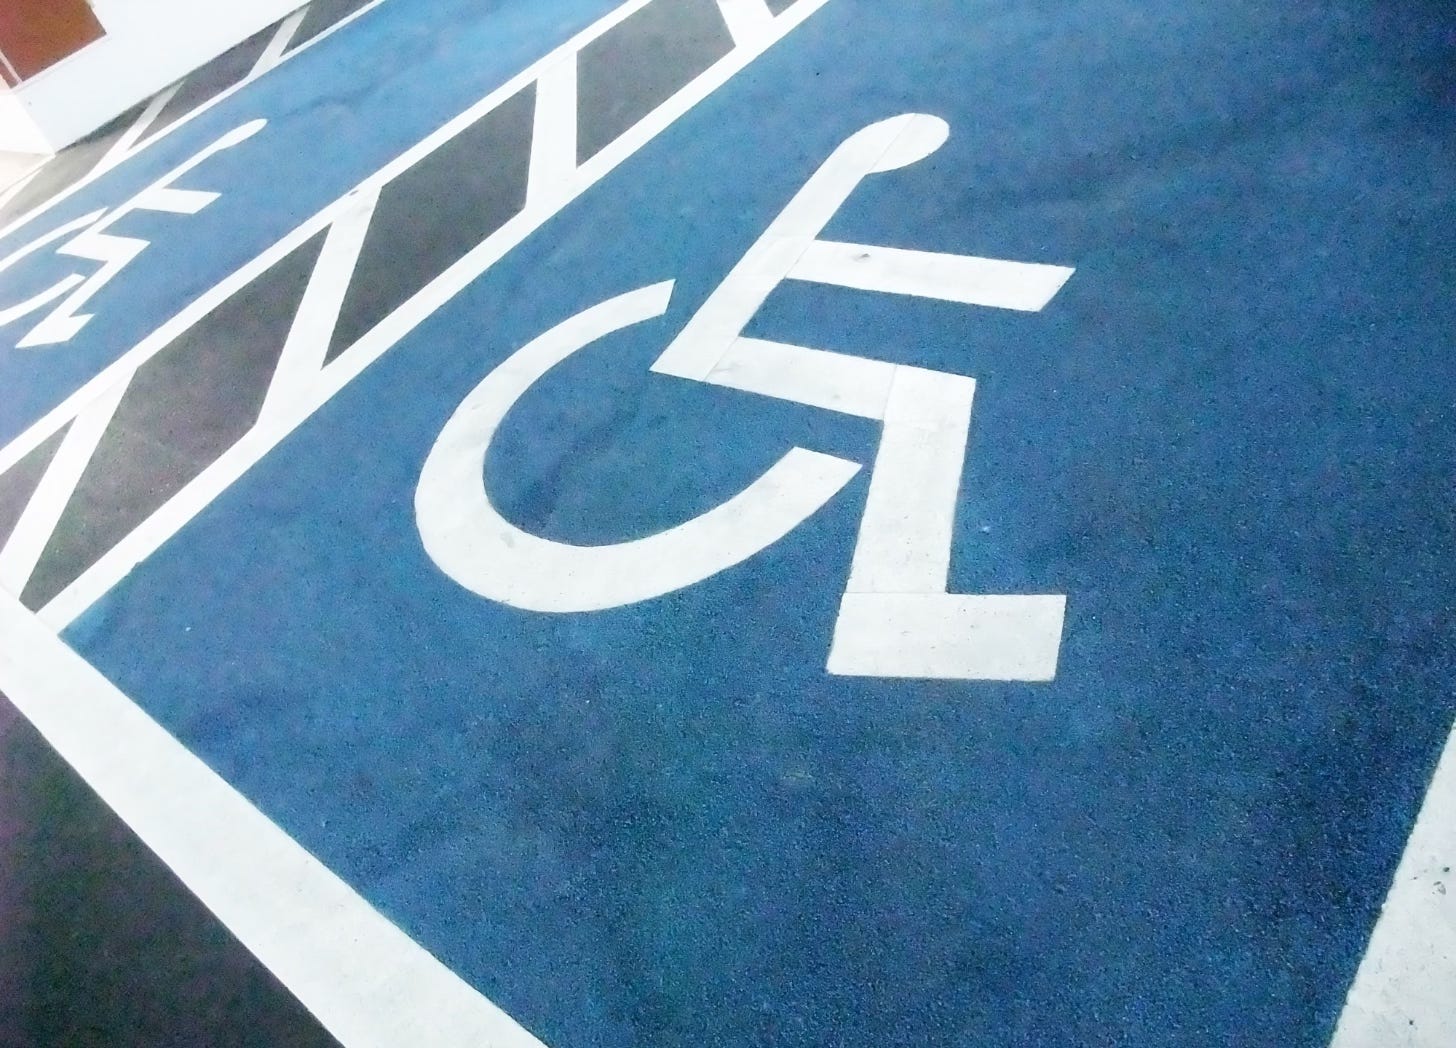 Wheelchair symbols marking accessible parking spaces